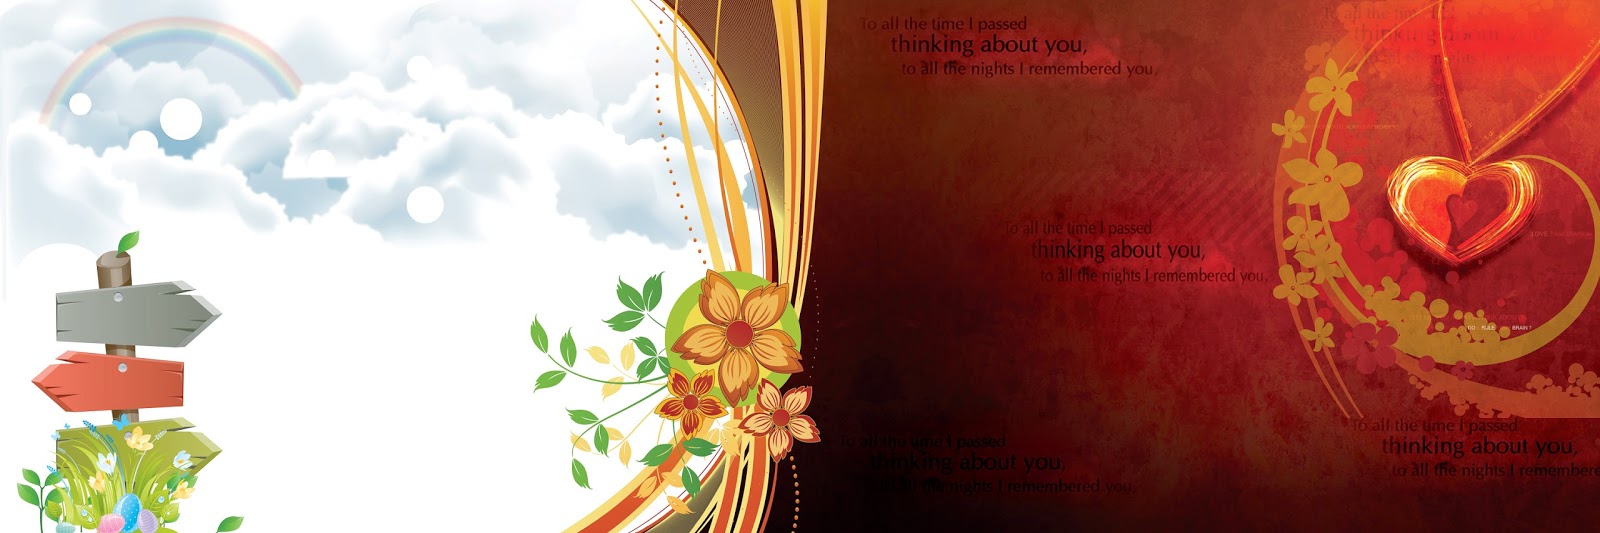 indian wedding clipart psd free download - photo #35